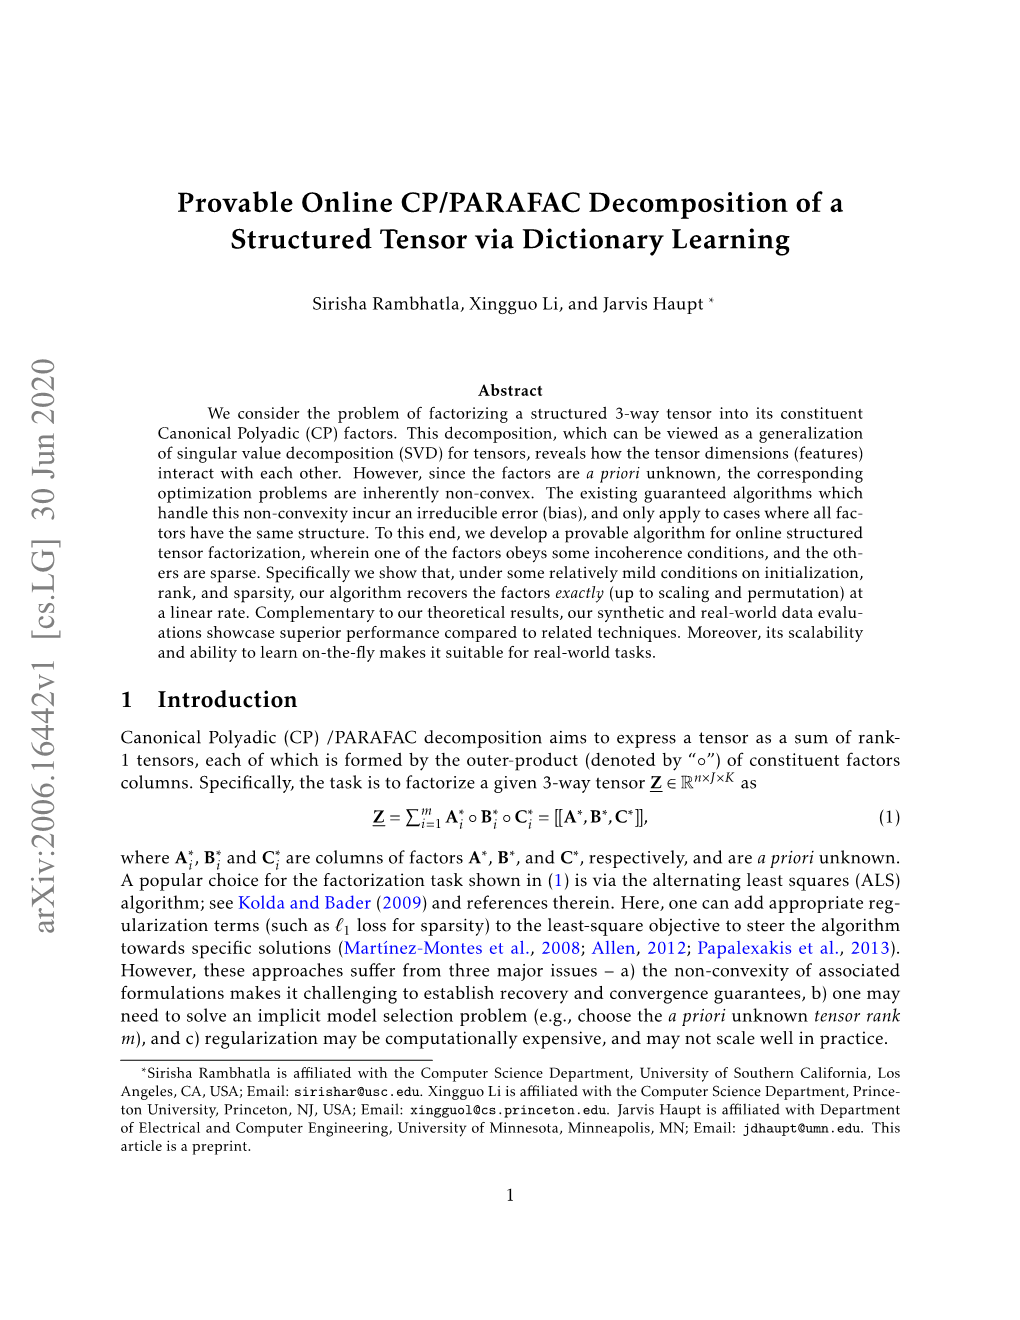 Provable Online CP/PARAFAC Decomposition of a Structured Tensor Via Dictionary Learning